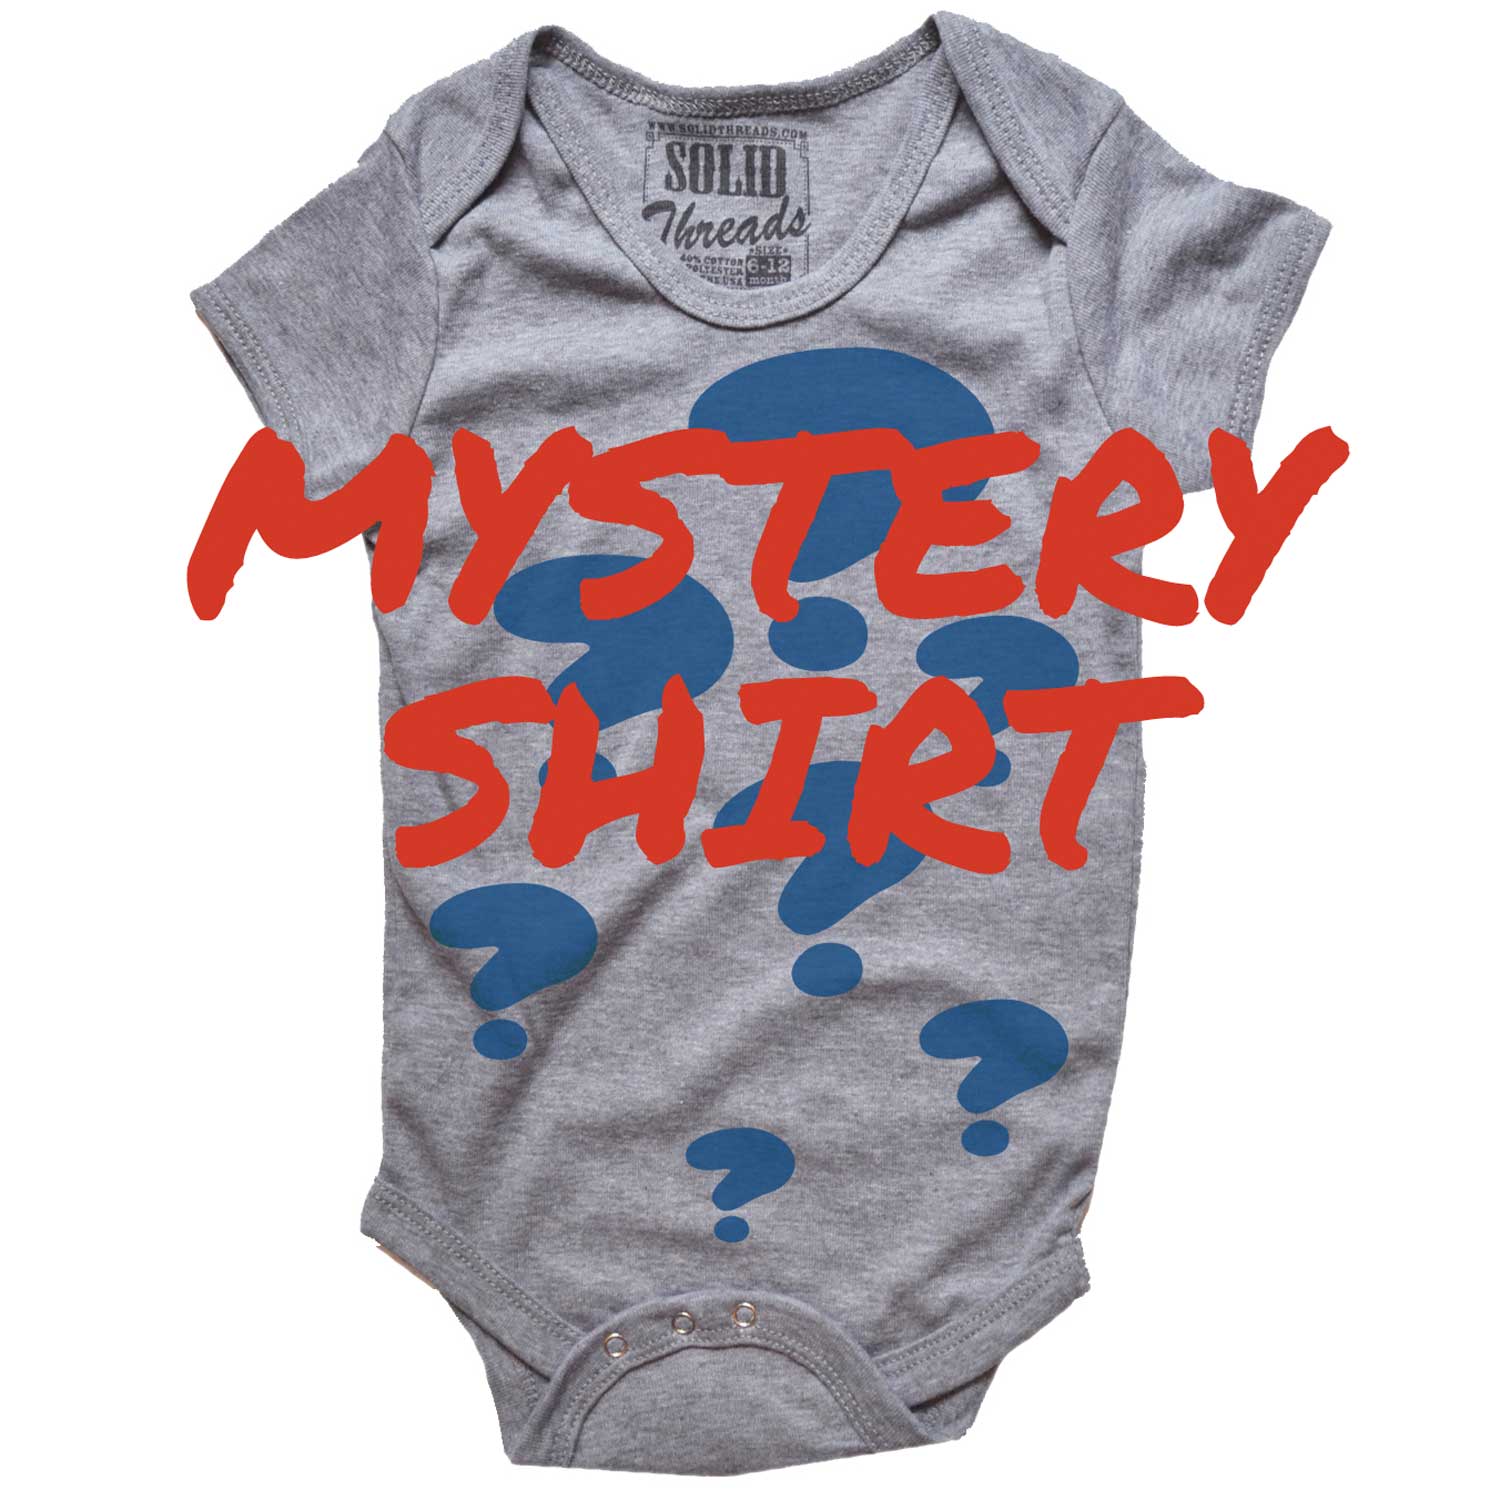 Baby Mystery Retro Graphic Onesie With Slight Defect | Cool Romper Surprise Design | Solid Threads